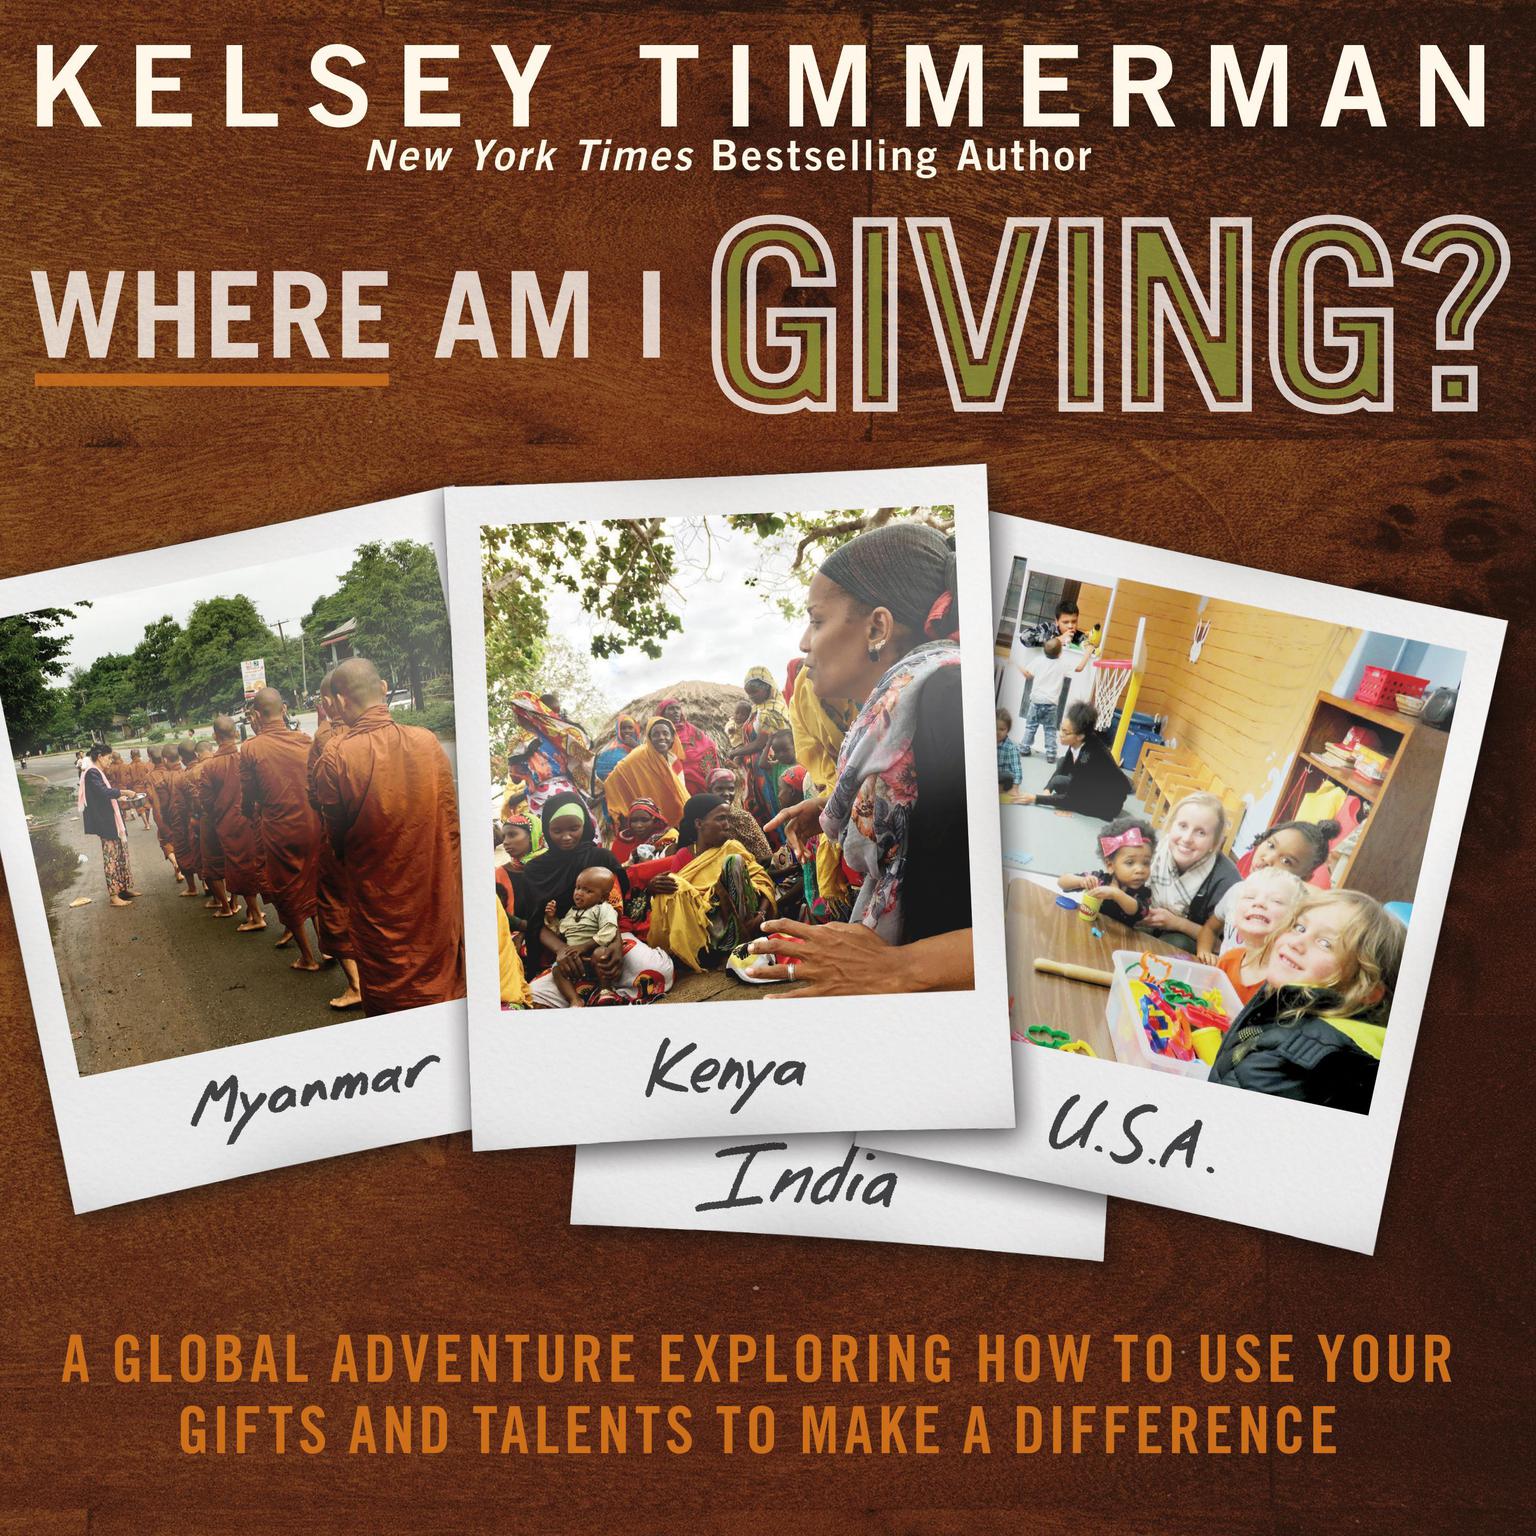 Where Am I Giving: A Global Adventure Exploring How to Use Your Gifts and Talents to Make a Difference Audiobook, by Kelsey Timmerman